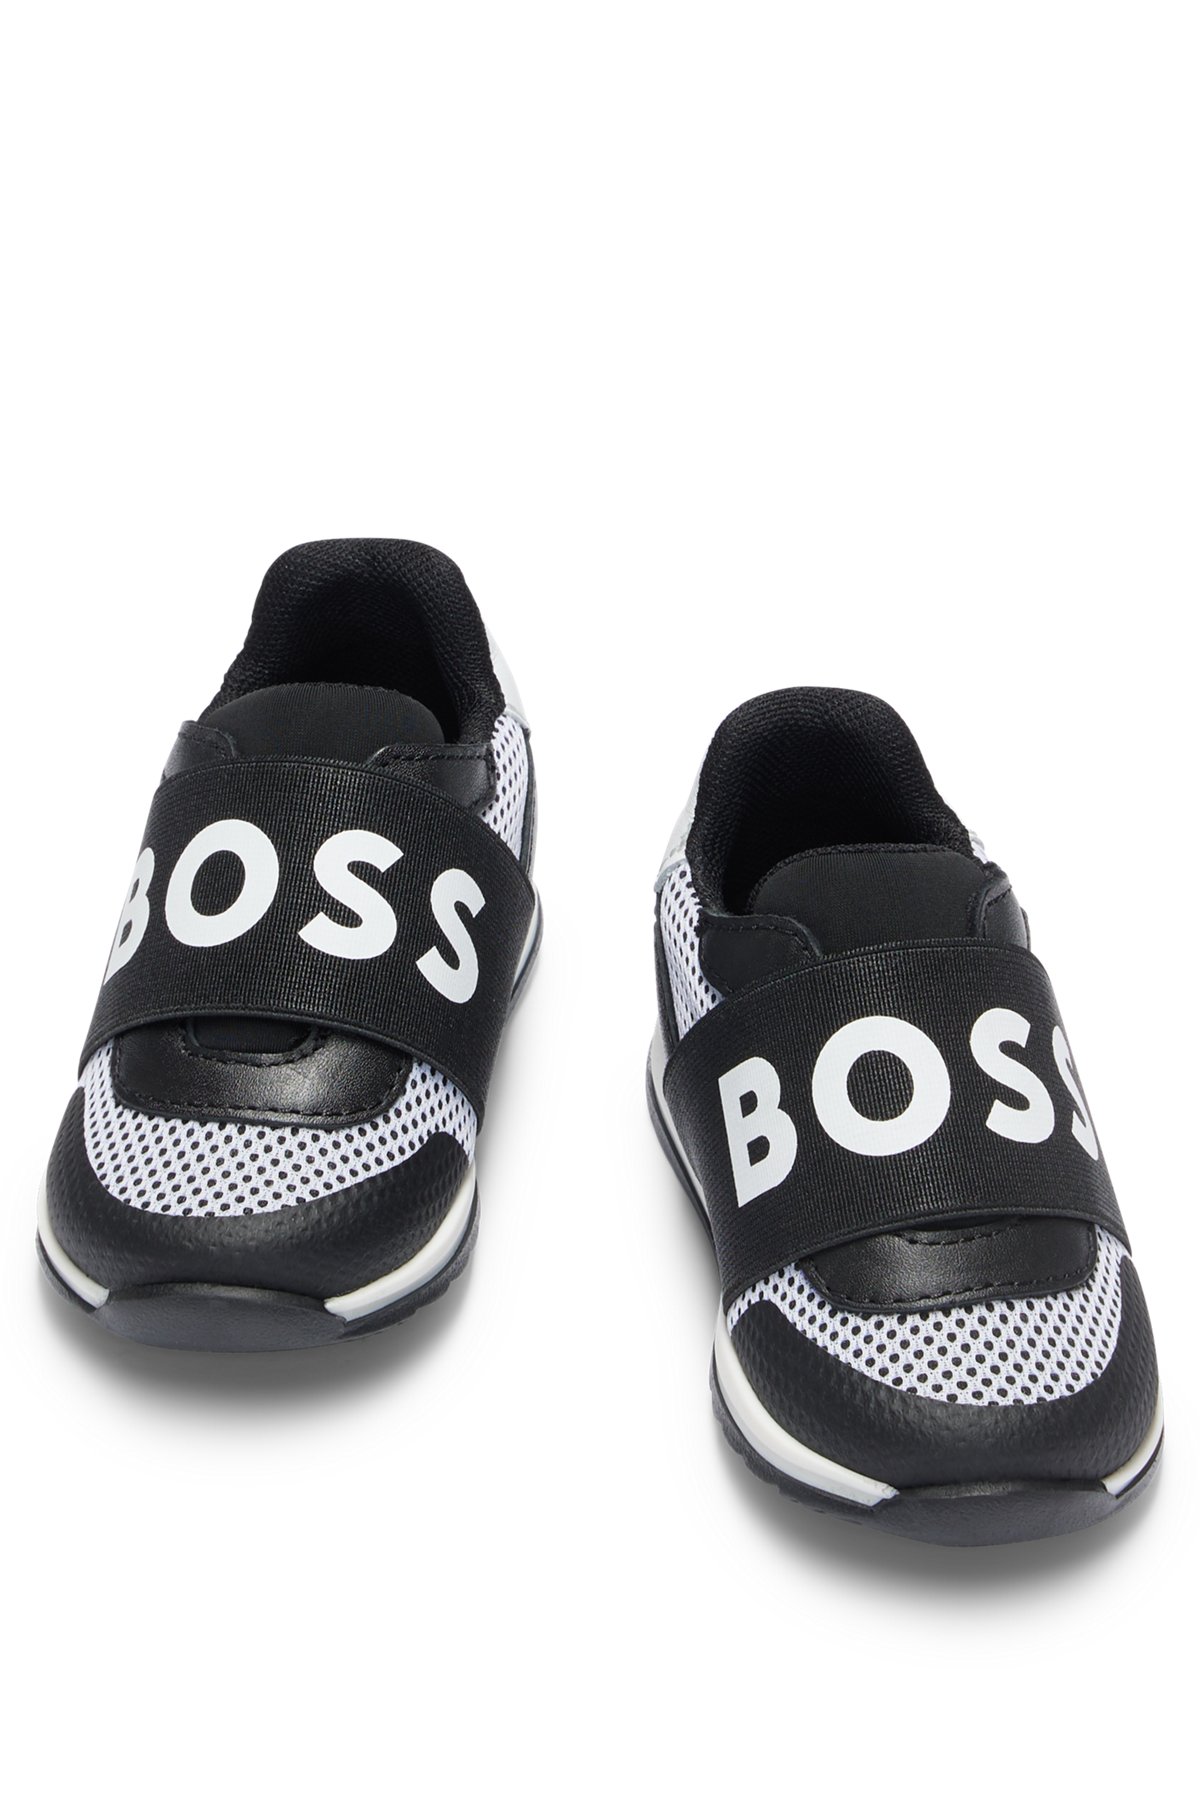 Kids' trainers in leather and mesh with logo strap, Black